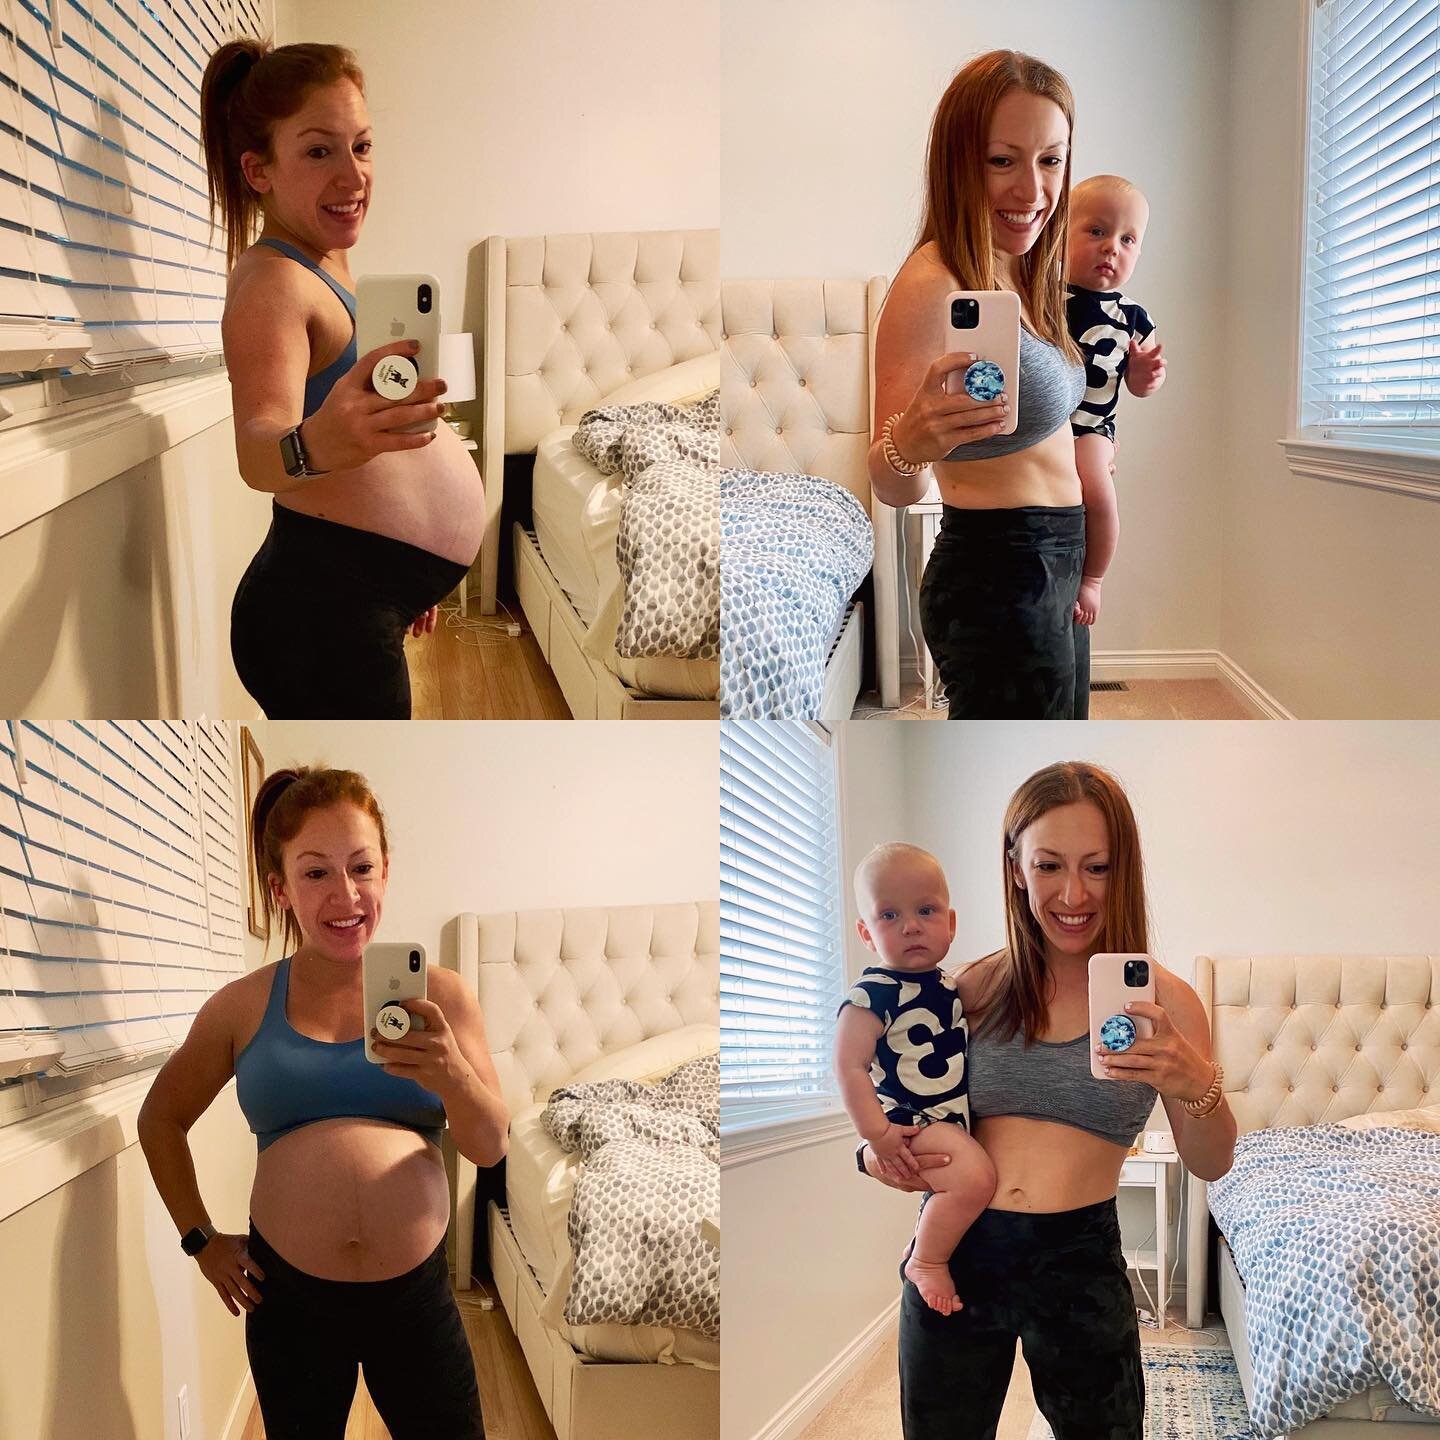 {41 weeks in &amp; 41 weeks out} I will never have my &ldquo;old body back&rdquo;. But neither will you {regardless of whether you just had a baby or are even female}. And I&rsquo;m not saying this to put anyone down. Hear me out on this one...
-
-
C